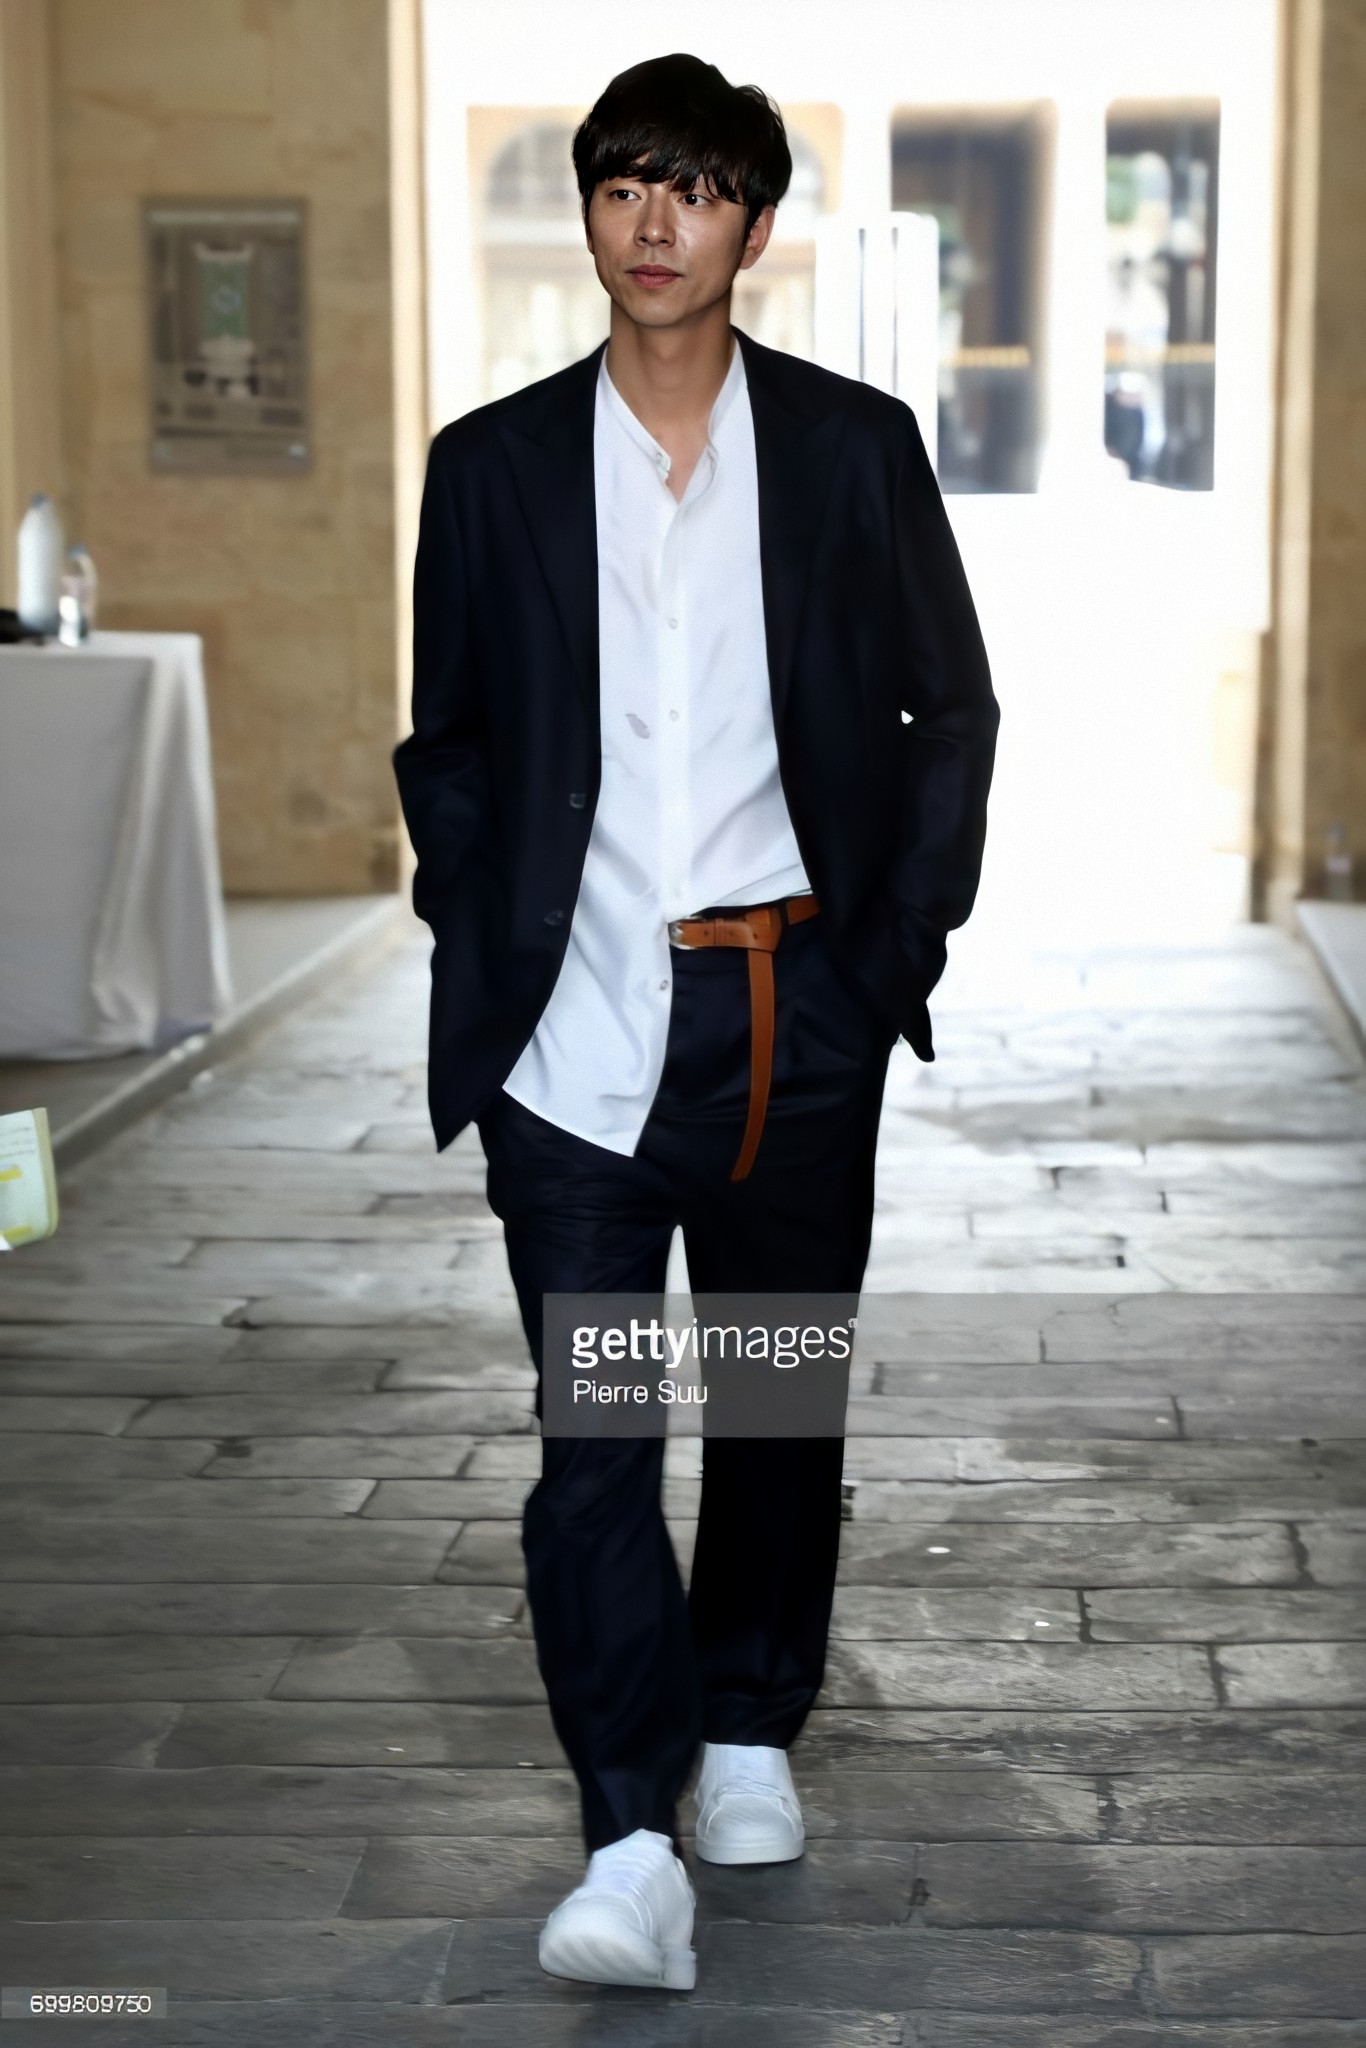 Gong Yoo Philippines 🇵🇭 on X: Gong Yoo for Louis Vuitton at Paris  Fashion Week last June 2017 held at Paris, France. ✨ #공유 #gongyoo  #gongjicheol #공지철  / X